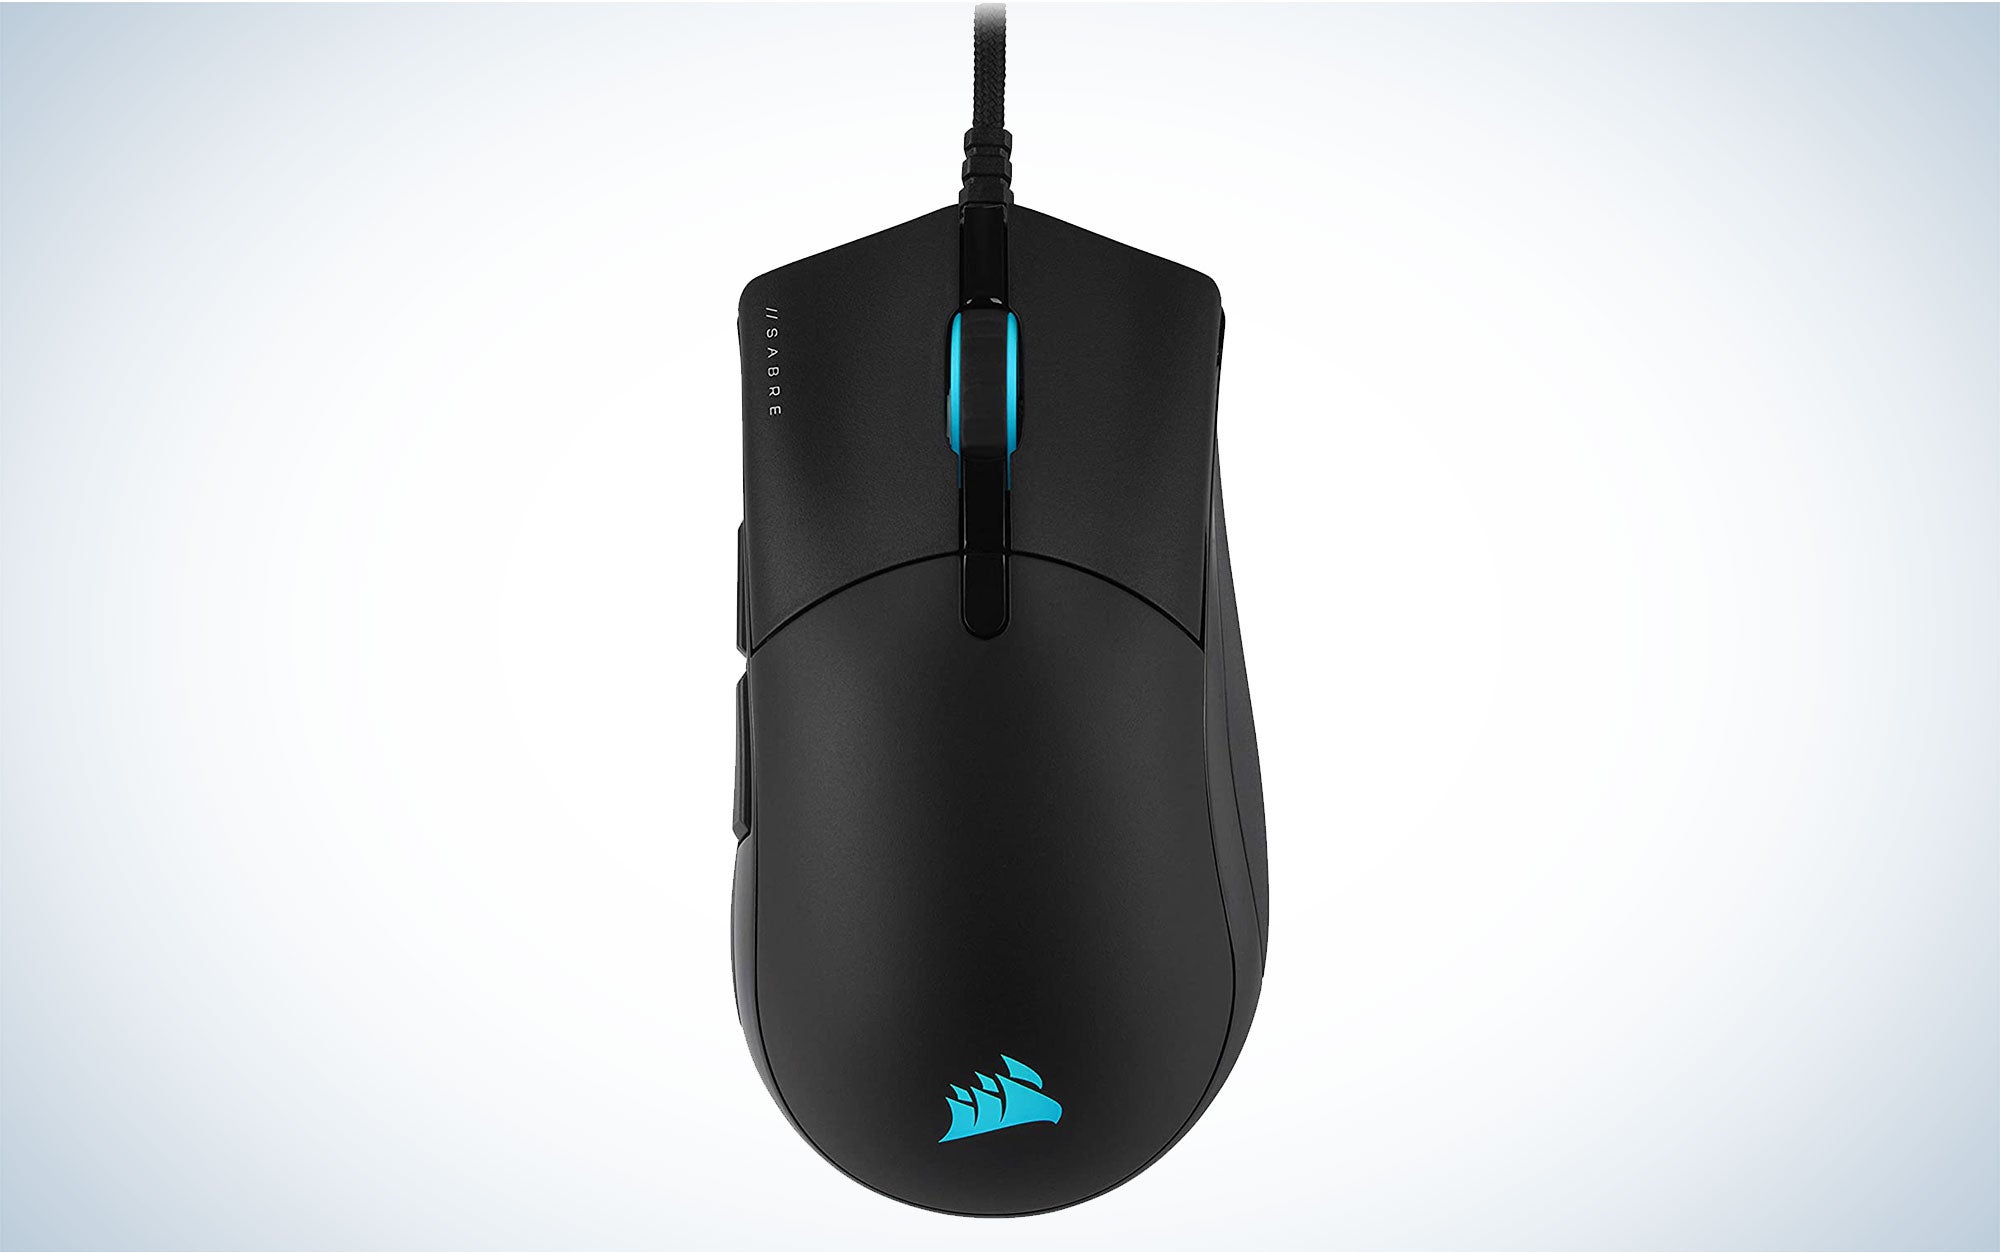 Consair Sabre PGB Pro is the best cheap gaming mouse.